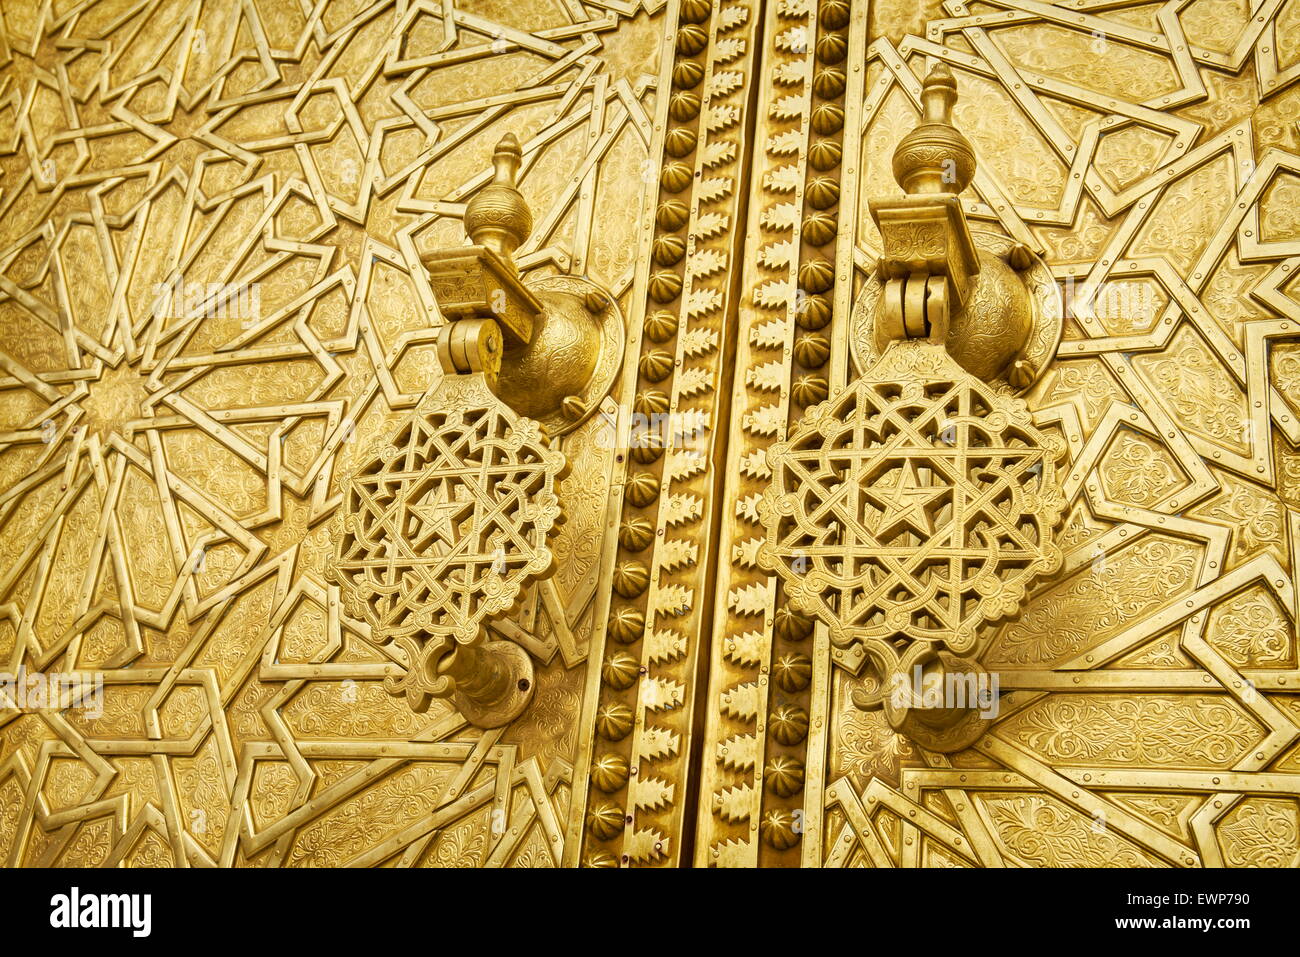 Fez, Royal Palace (Jdid Dar El Makhzen), closeup of ornate carved brass door. Morocco Stock Photo